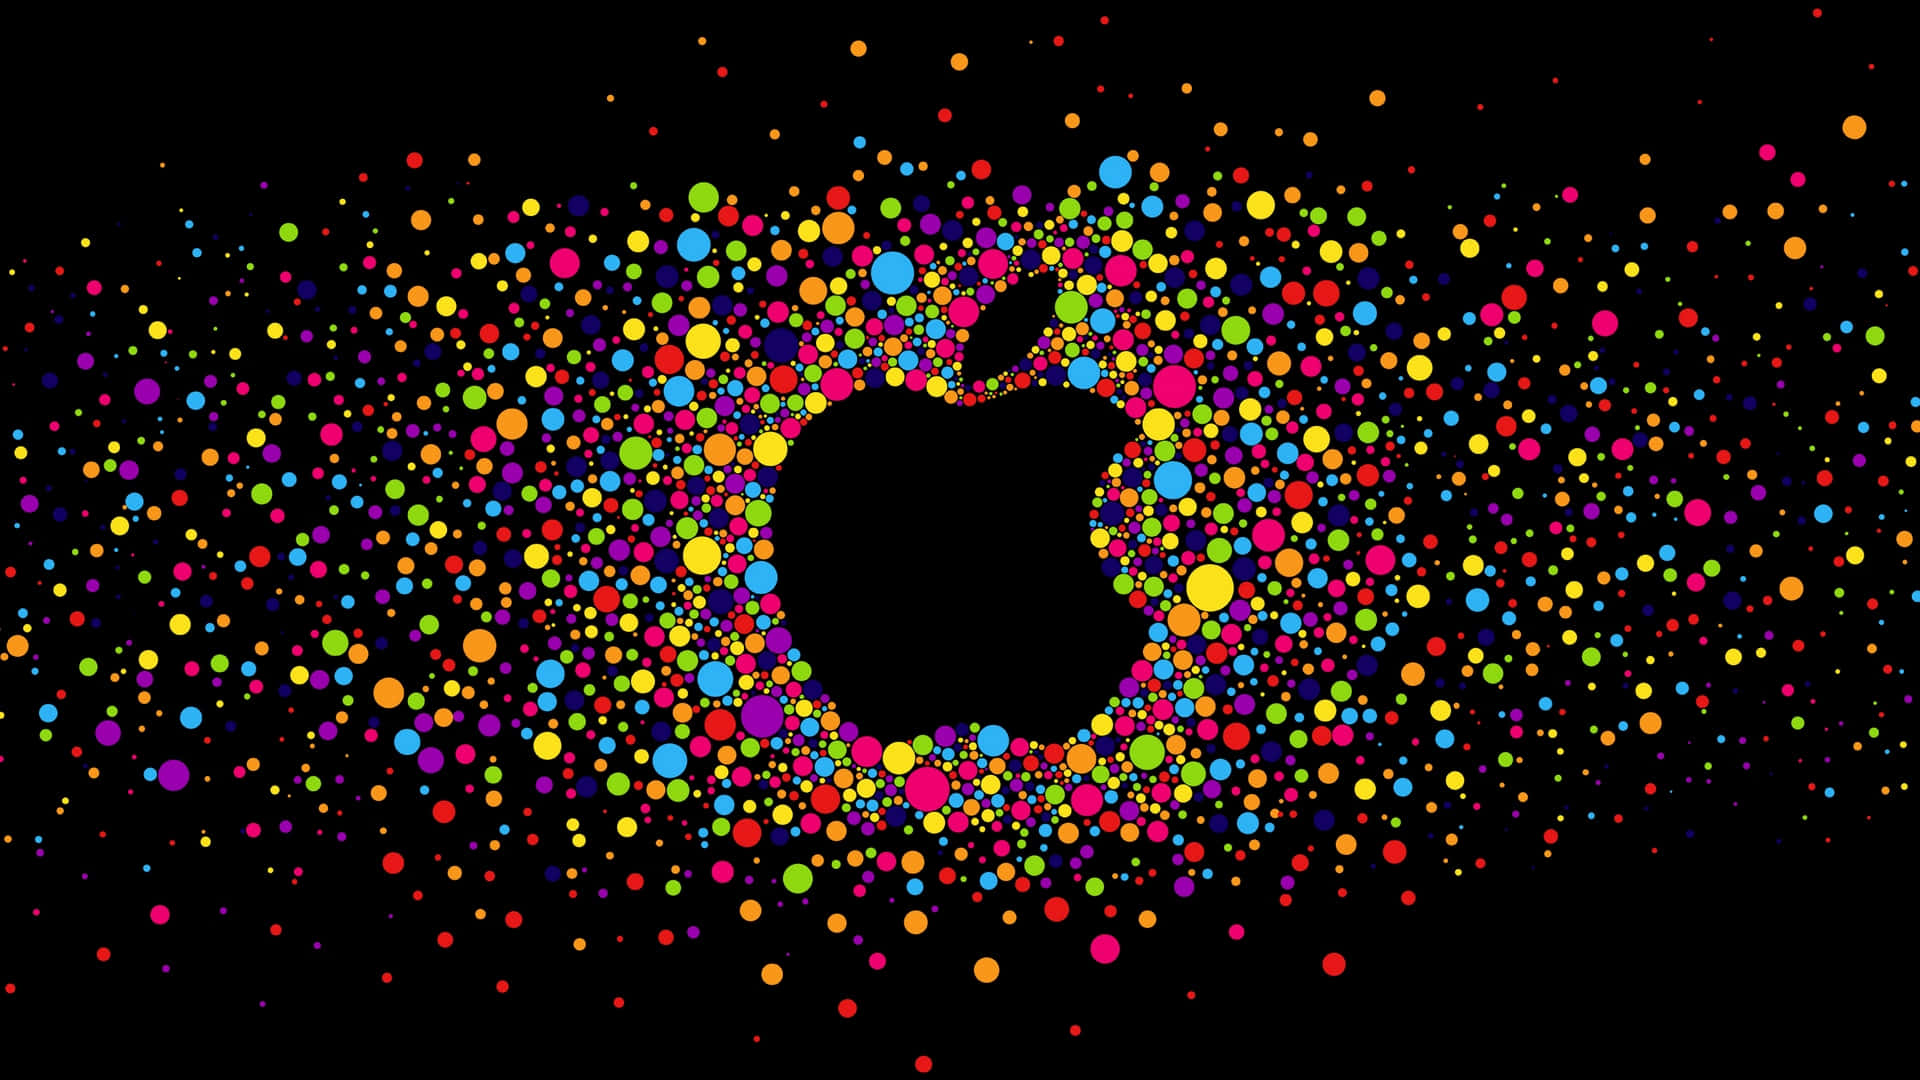 Black Apple Logo With Colorful Circles Wallpaper